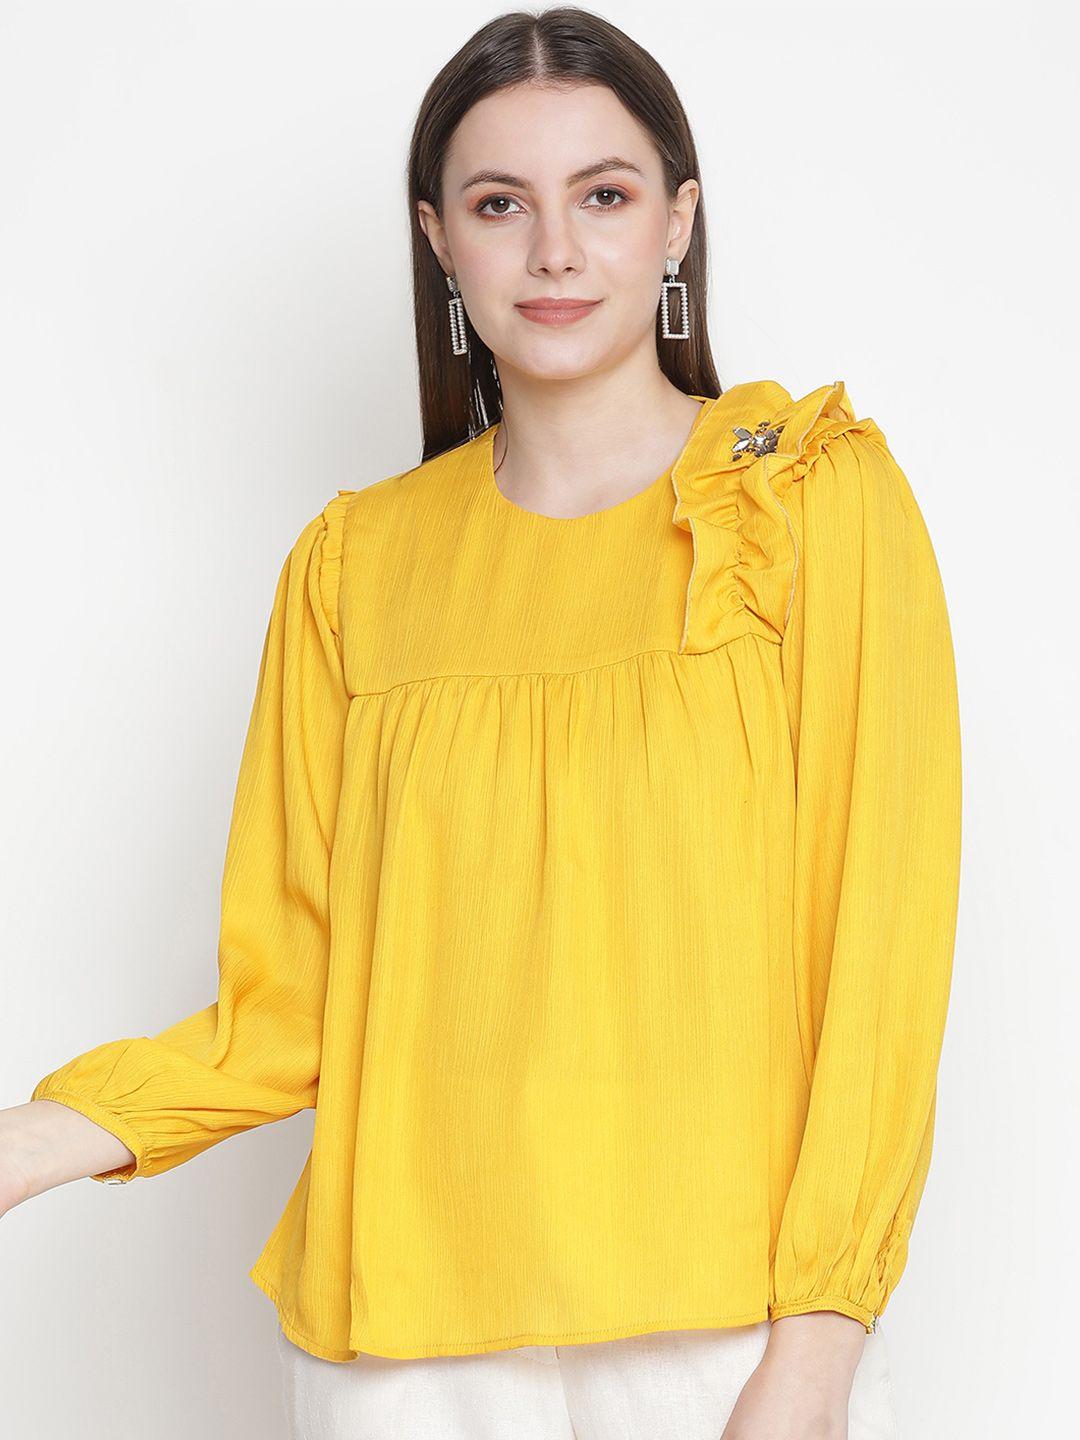 oxolloxo-yellow-solid-ruffled-empire-top